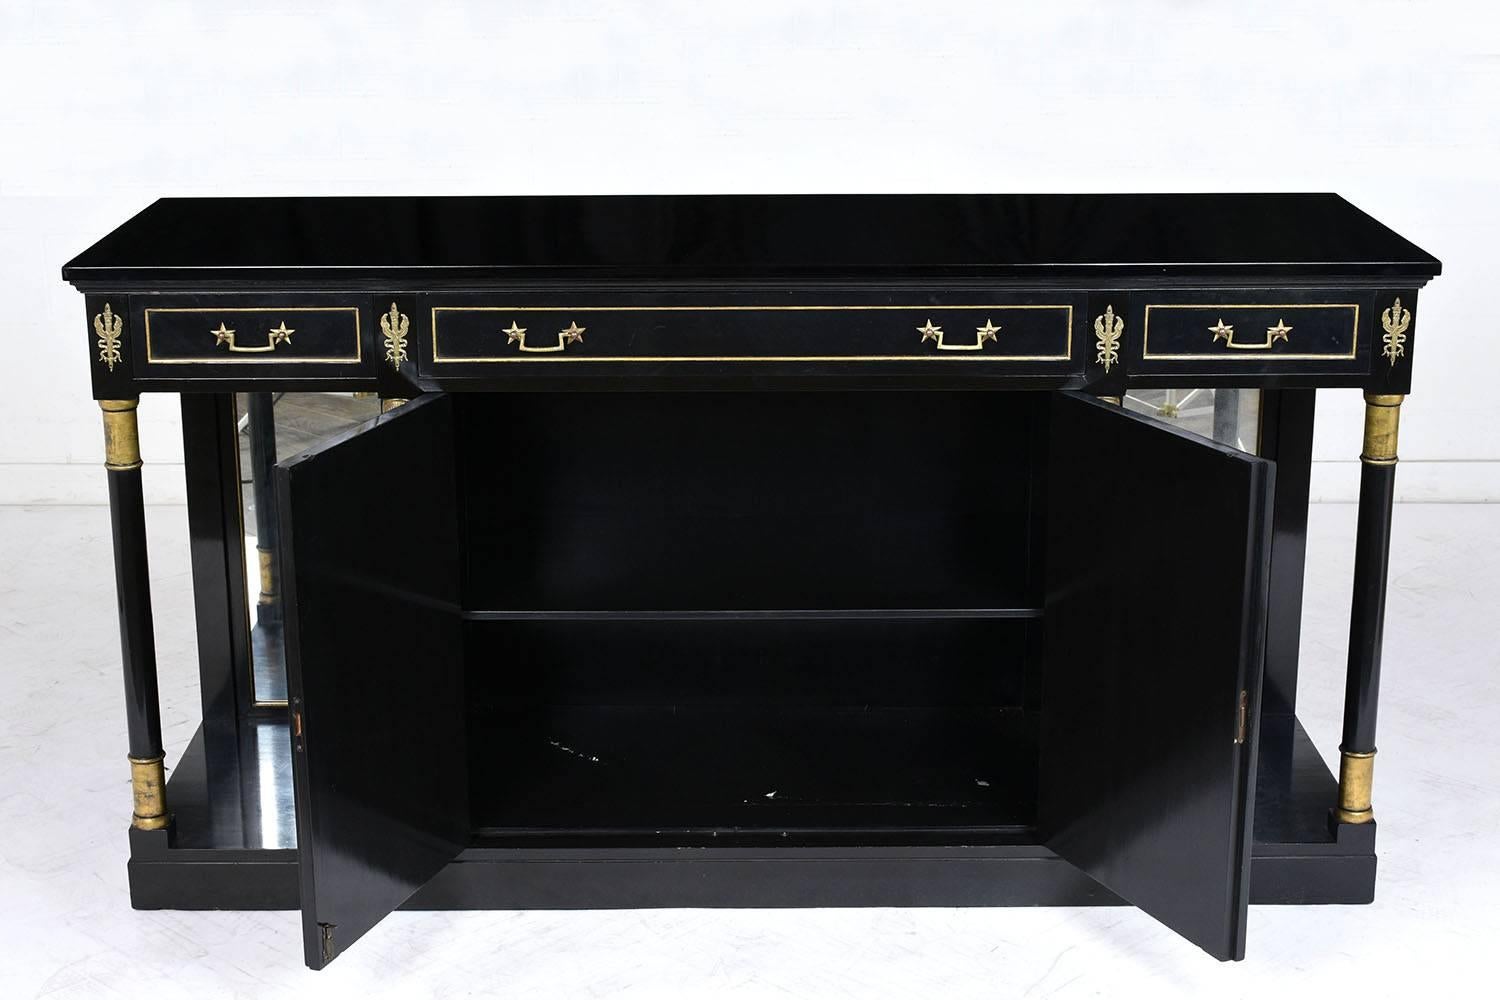 Carved Empire-Style Ebonized Server or Buffet